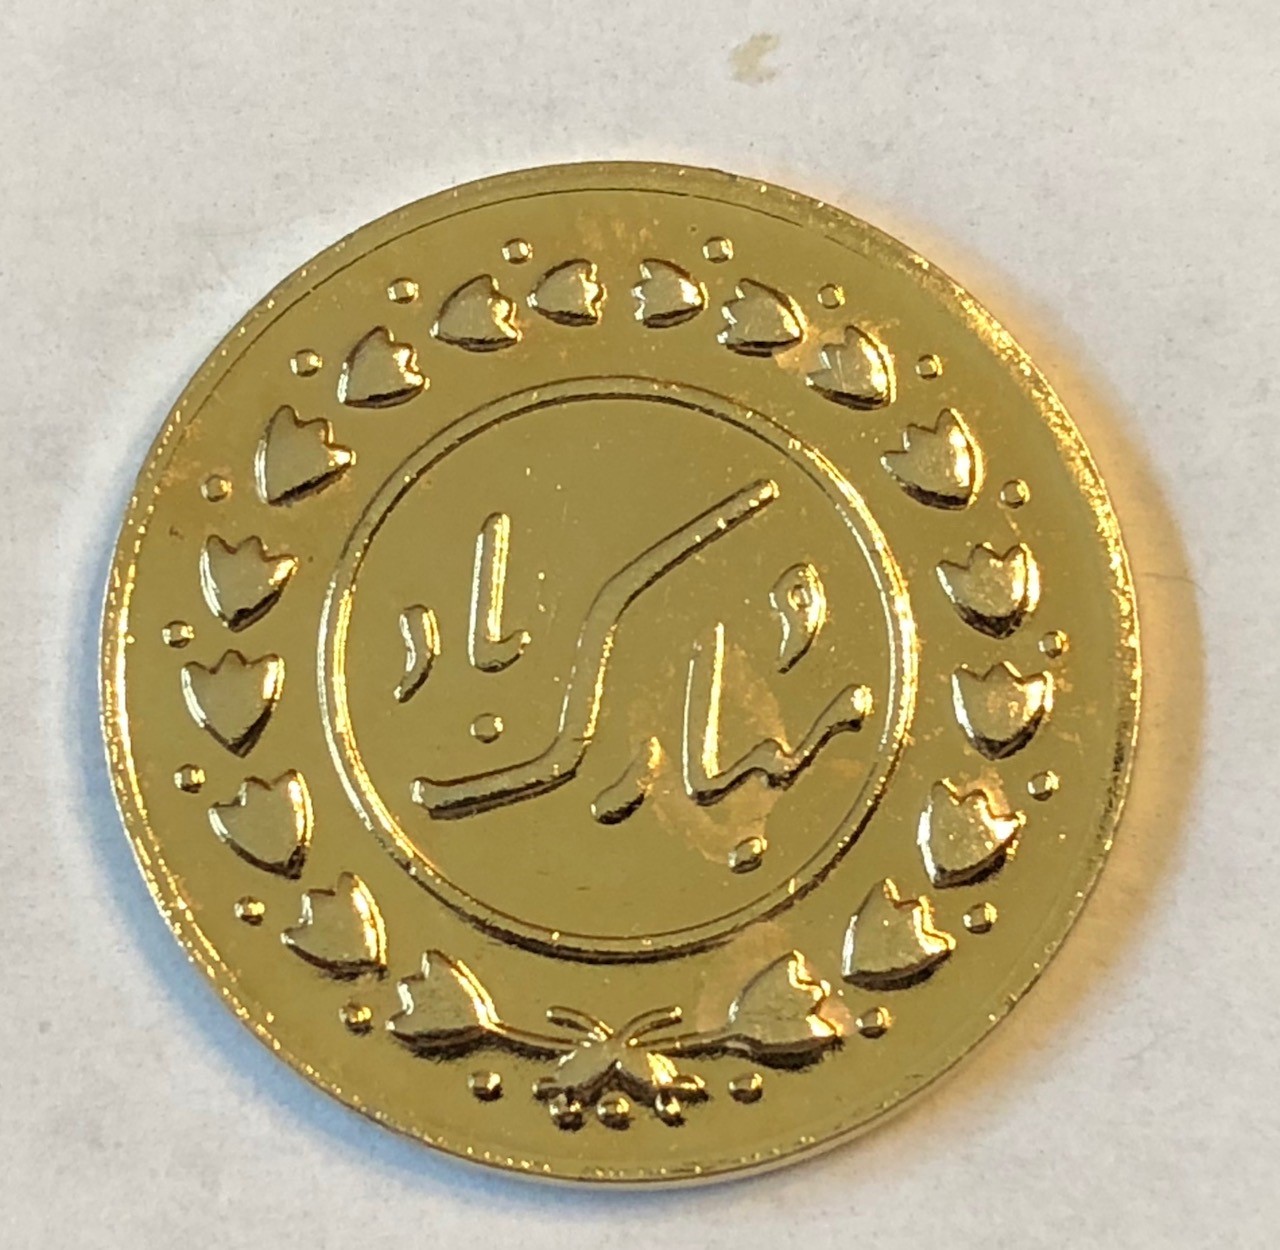 Foreign Coin Pic 2.jpg